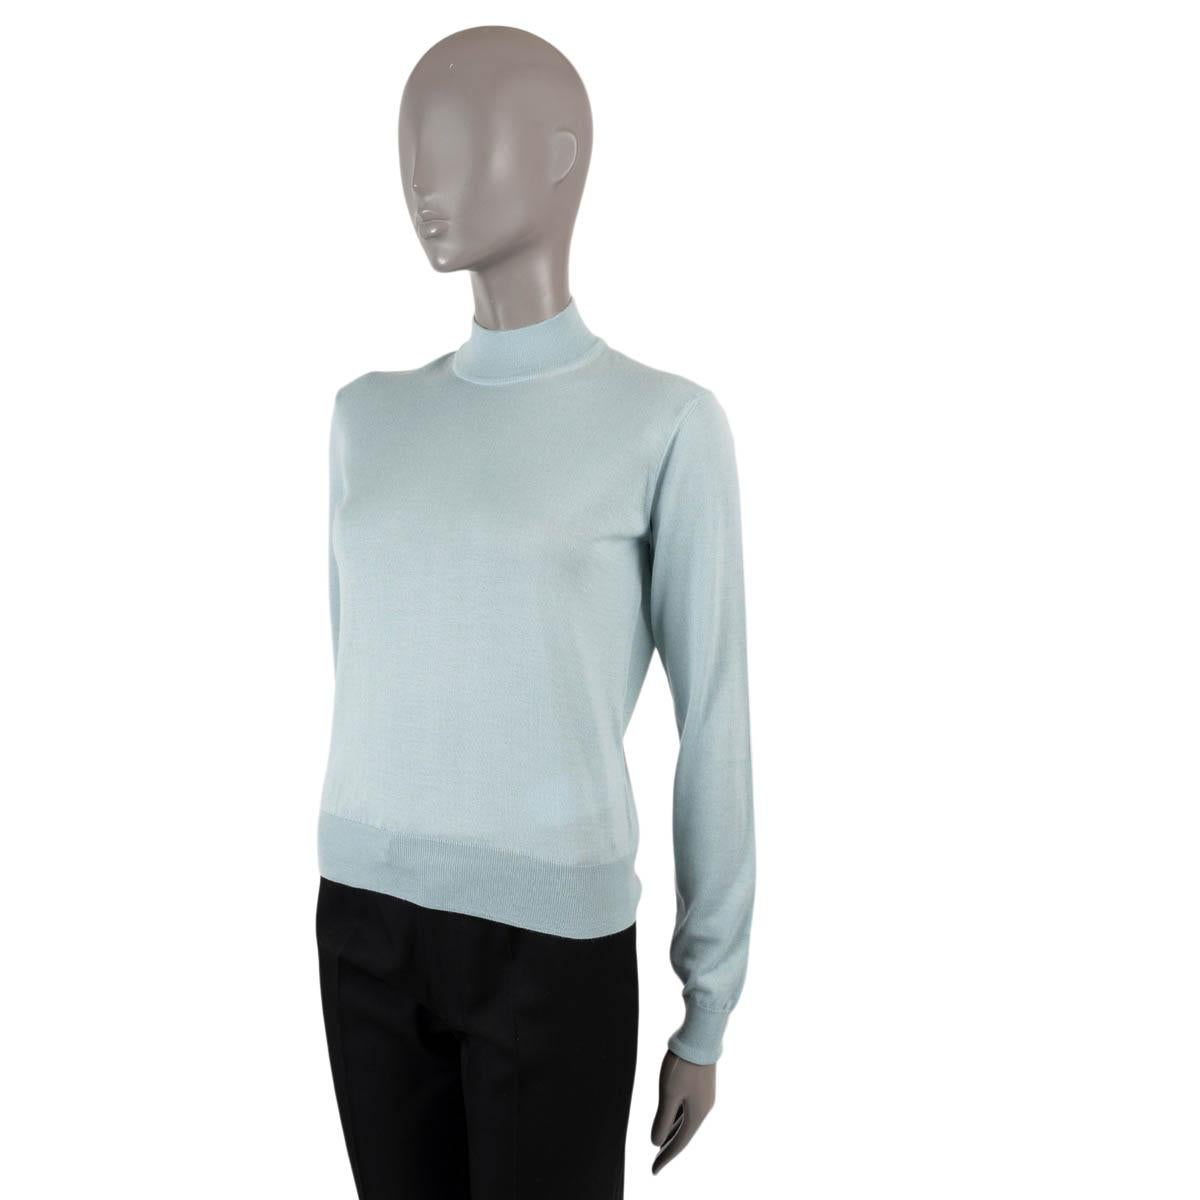 100% authentic Giorgio Armani monck neck sweater in baby blue cashmere (70%) and silk (30%). Has been worn and is in virtually new condition.

Measurements
Model	3GAM11 AM33Z
Tag Size	40
Size	S
Shoulder Width	40cm (15.6in)
Bust From	92cm